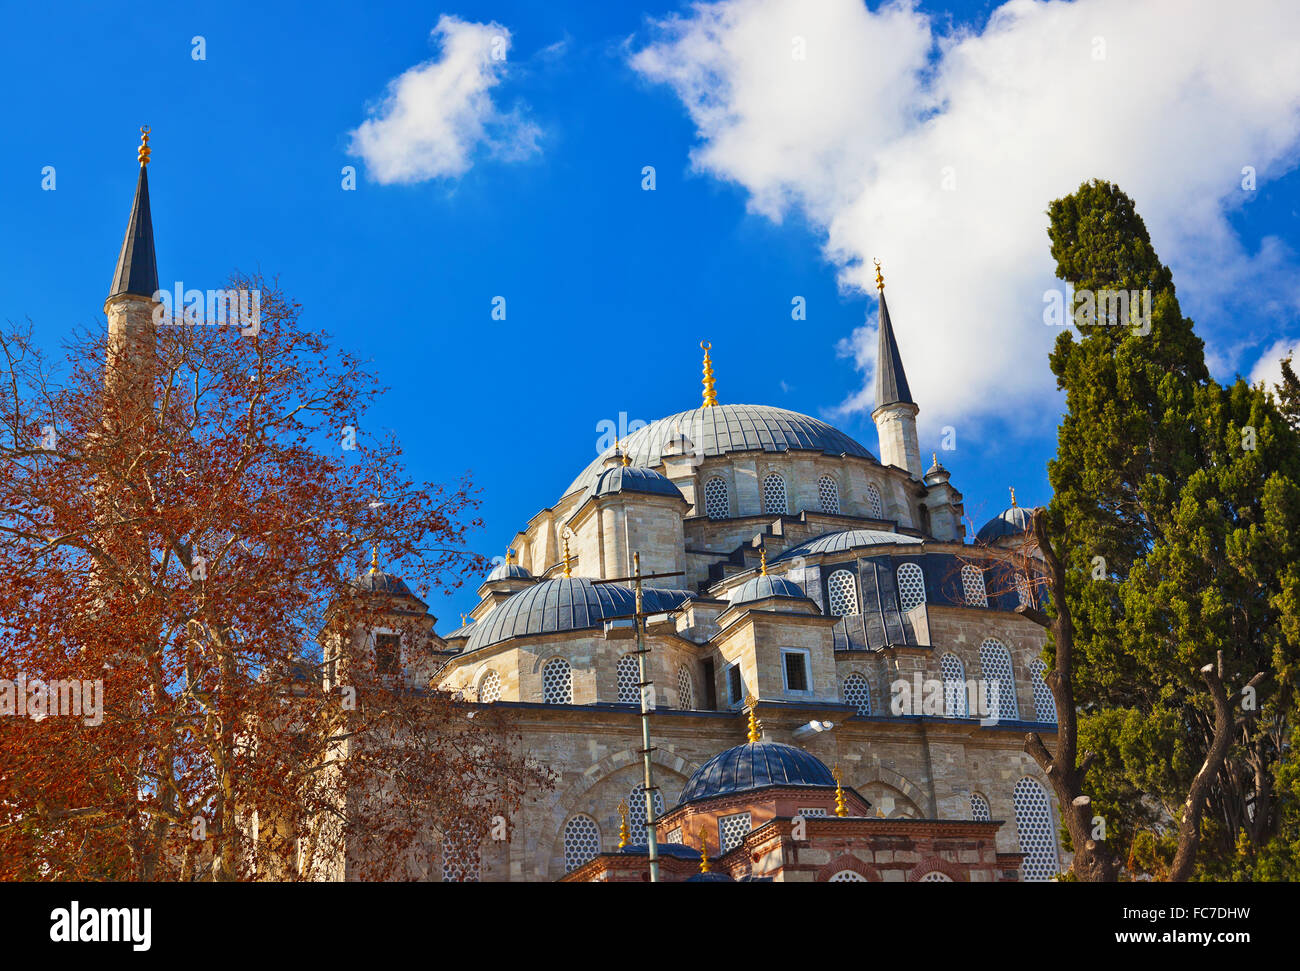 Fatih mosque in Istanbul Turkey Stock Photo